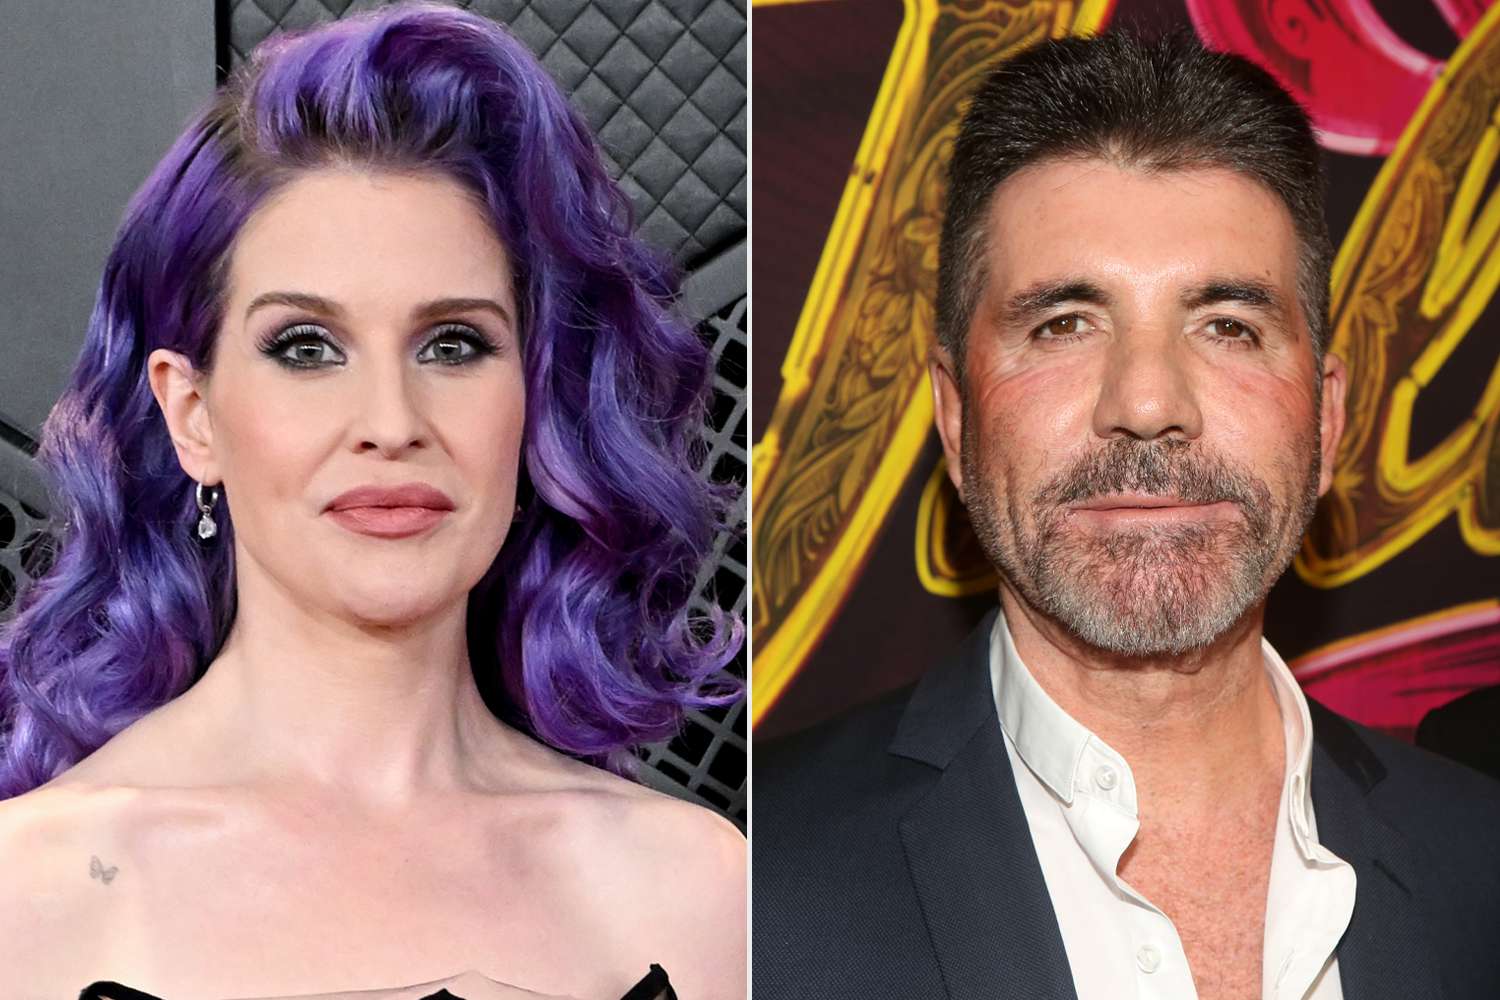 Kelly Osbourne Says Simon Cowell ’Threw a Fit’ and Had Her Family Pulled from “American Idol” Minutes Before Appearance